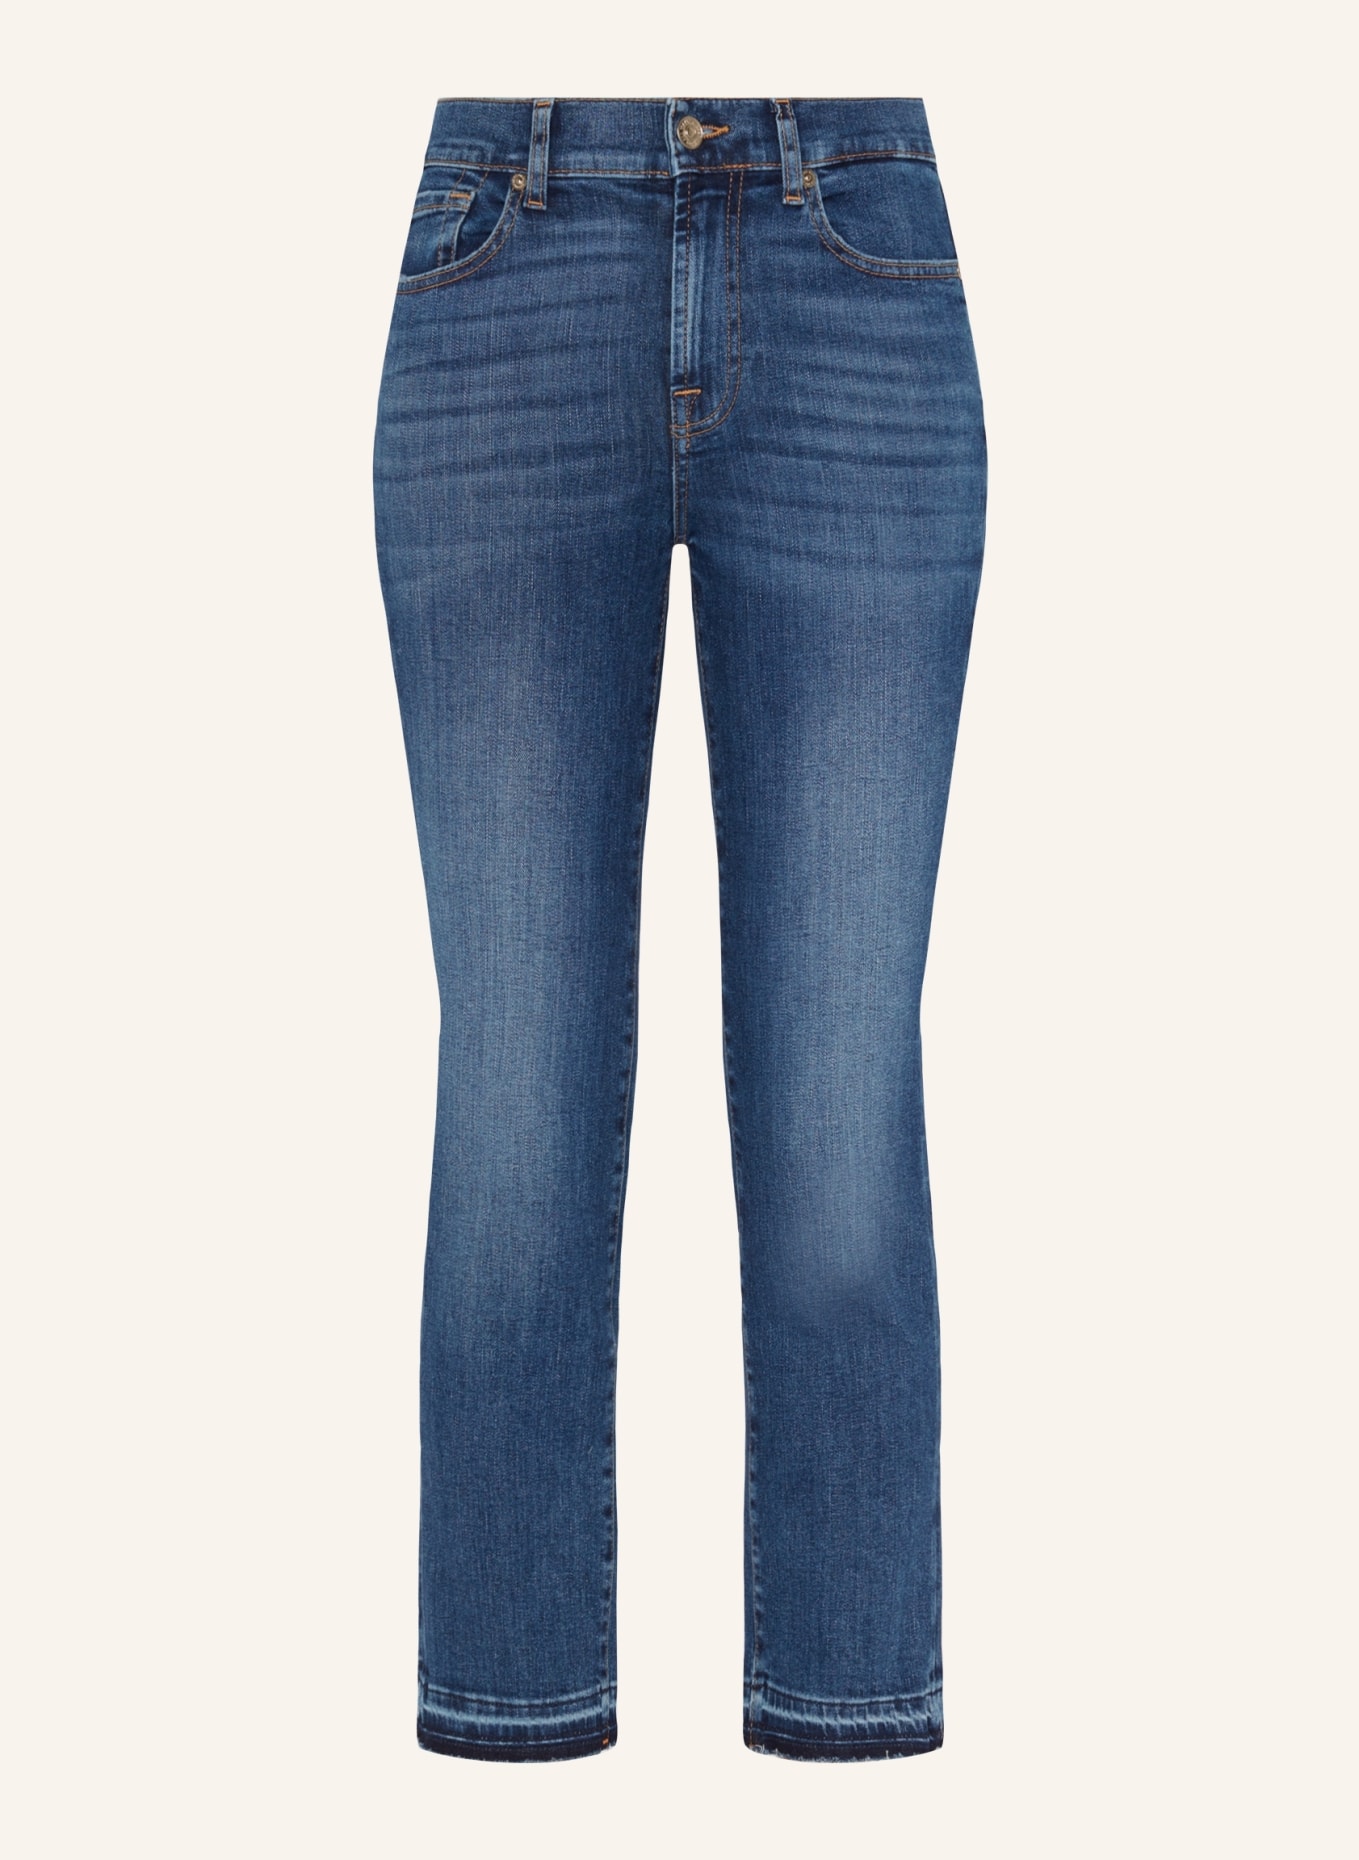 7 for all mankind Jeans  THE STRAIGHT CROP Straight Fit, Farbe: BLAU (Bild 1)